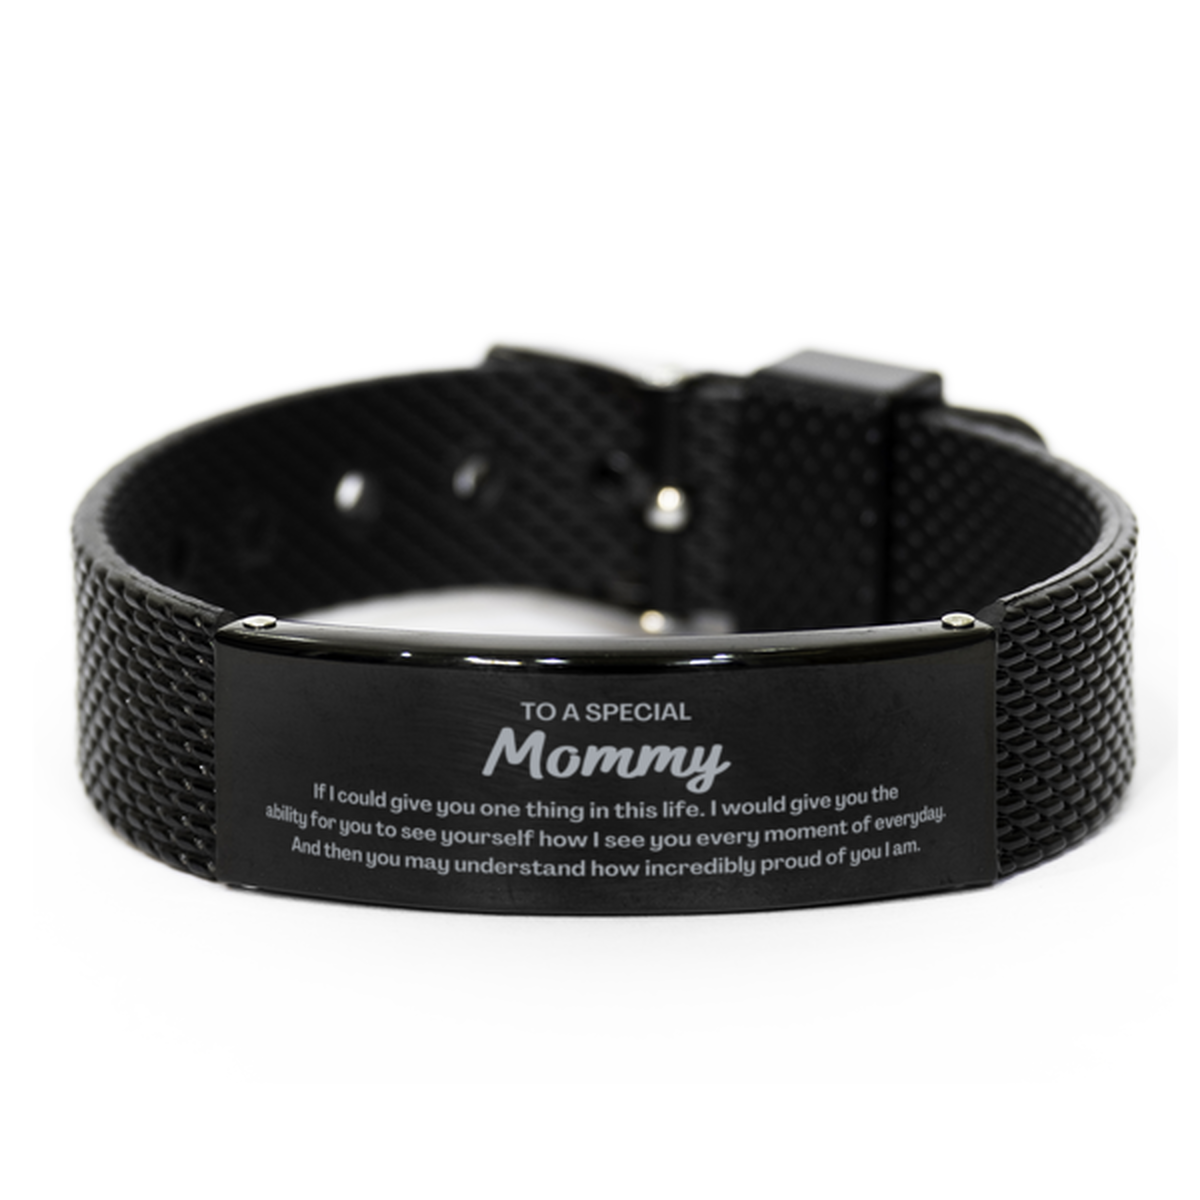 To My Mommy Black Shark Mesh Bracelet, Gifts For Mommy Engraved, Inspirational Gifts for Christmas Birthday, Epic Gifts for Mommy To A Special Mommy how incredibly proud of you I am